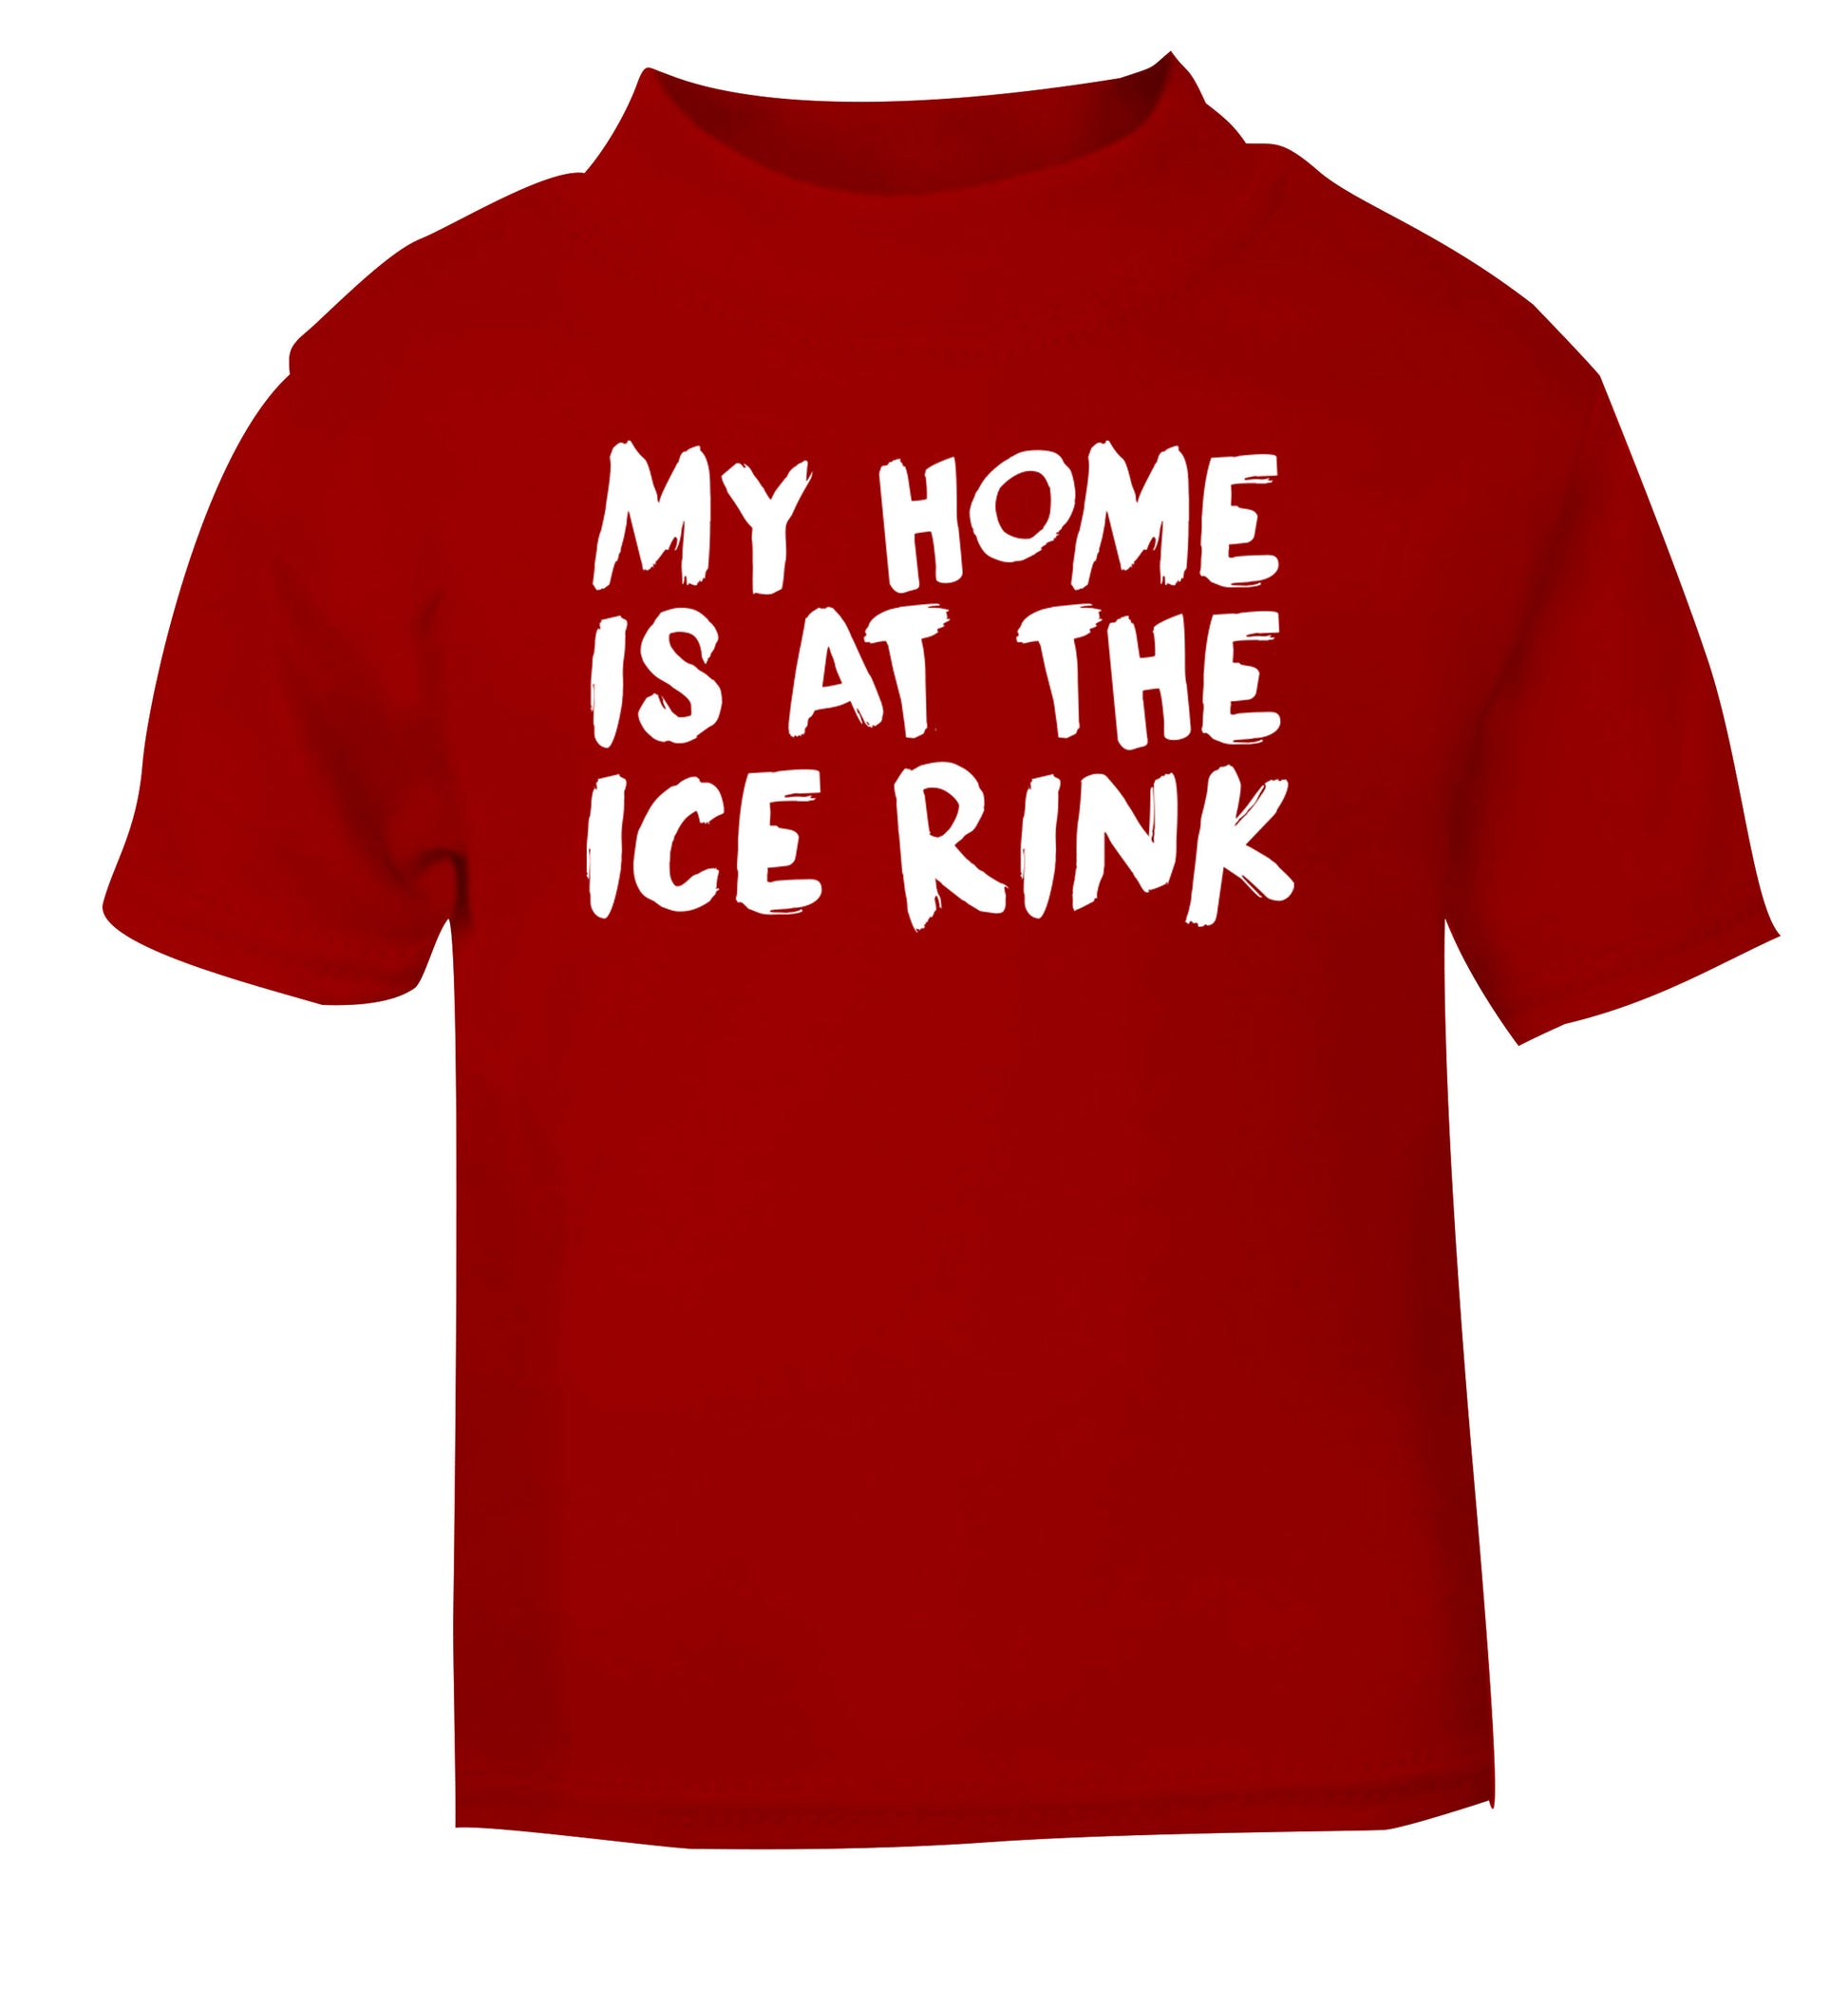 My home is at the ice rink red Baby Toddler Tshirt 2 Years